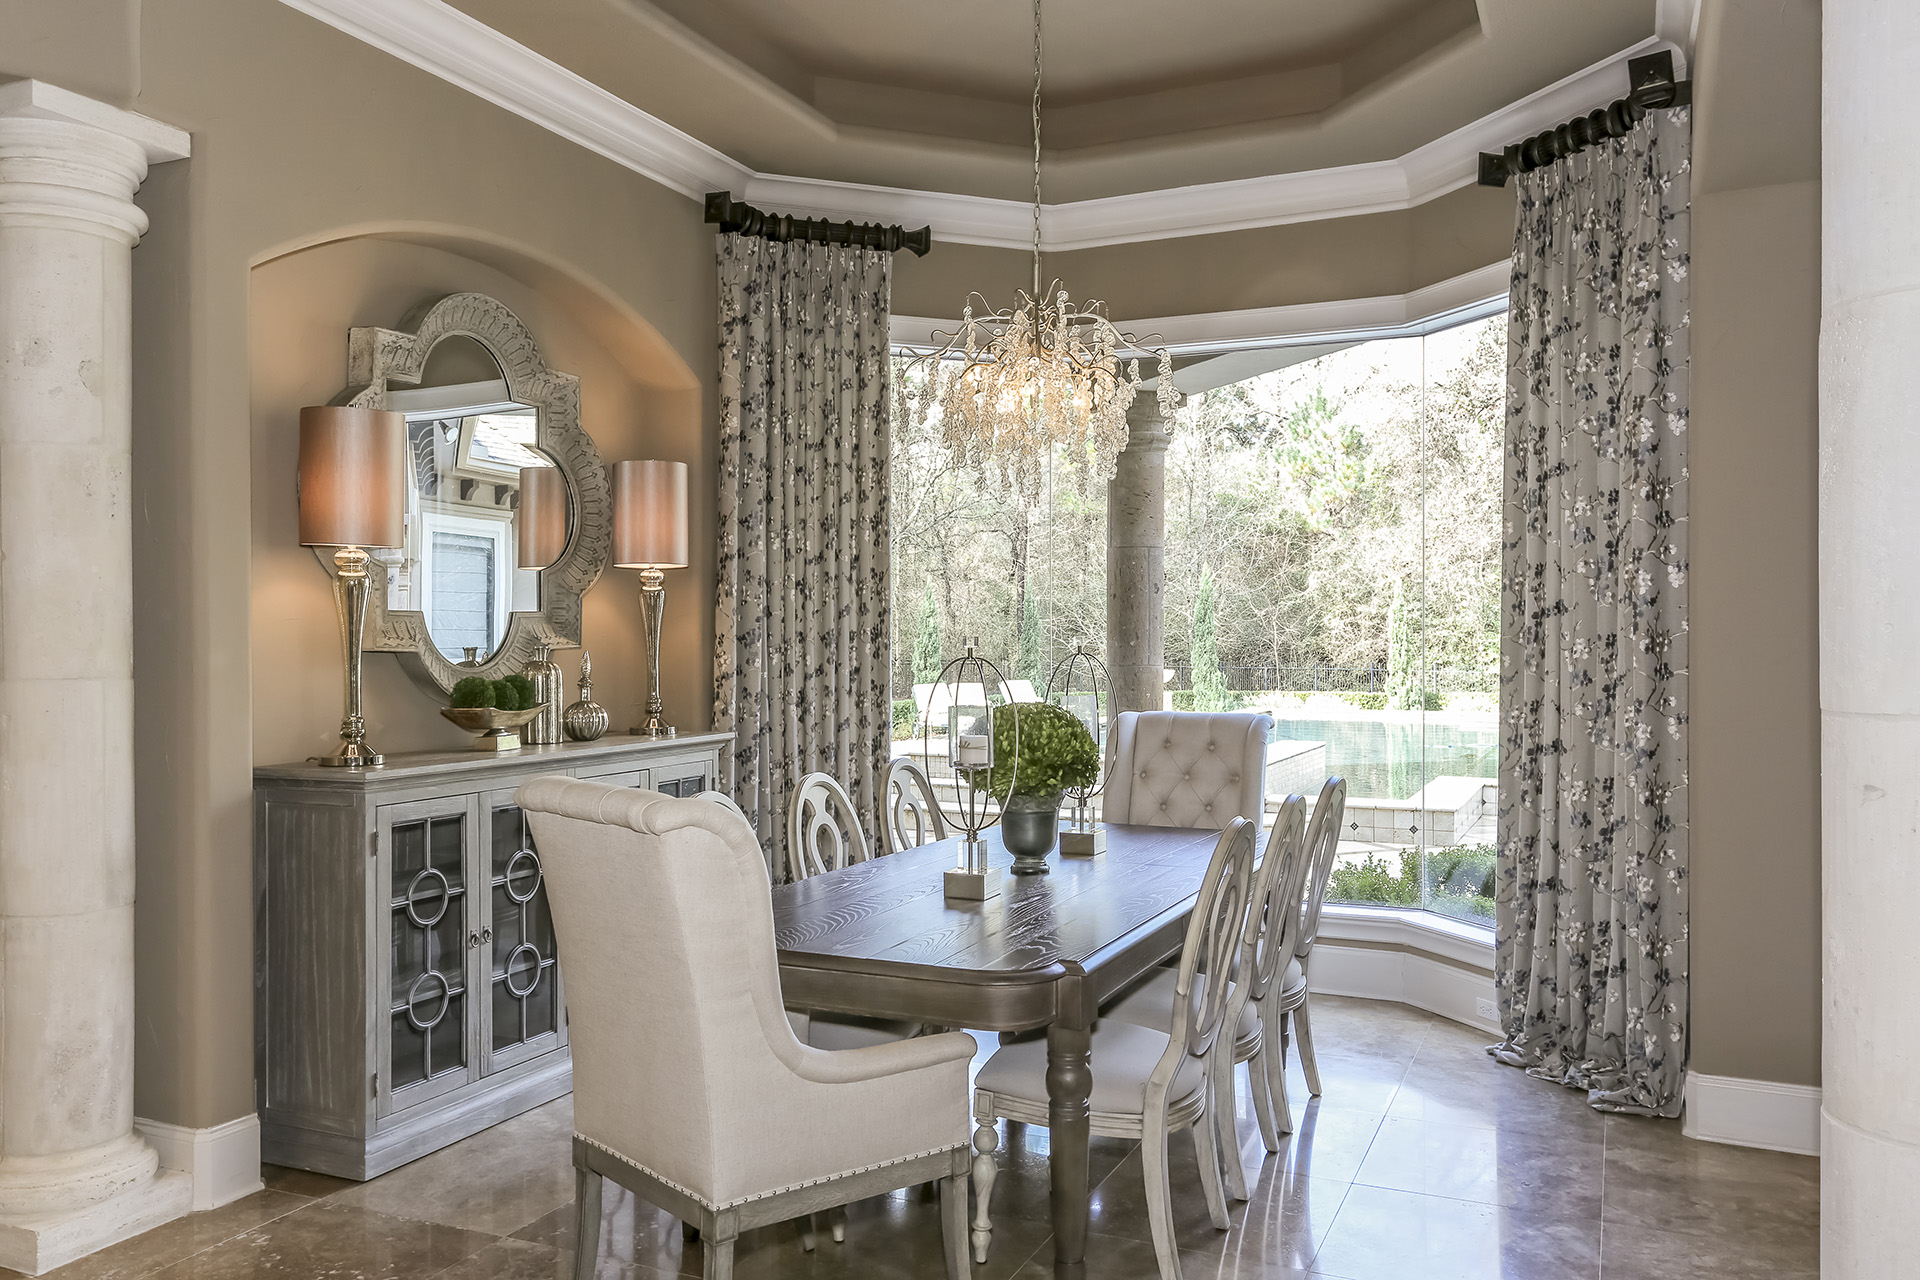 2018 – First Place Dream Room Winner – Dining Room